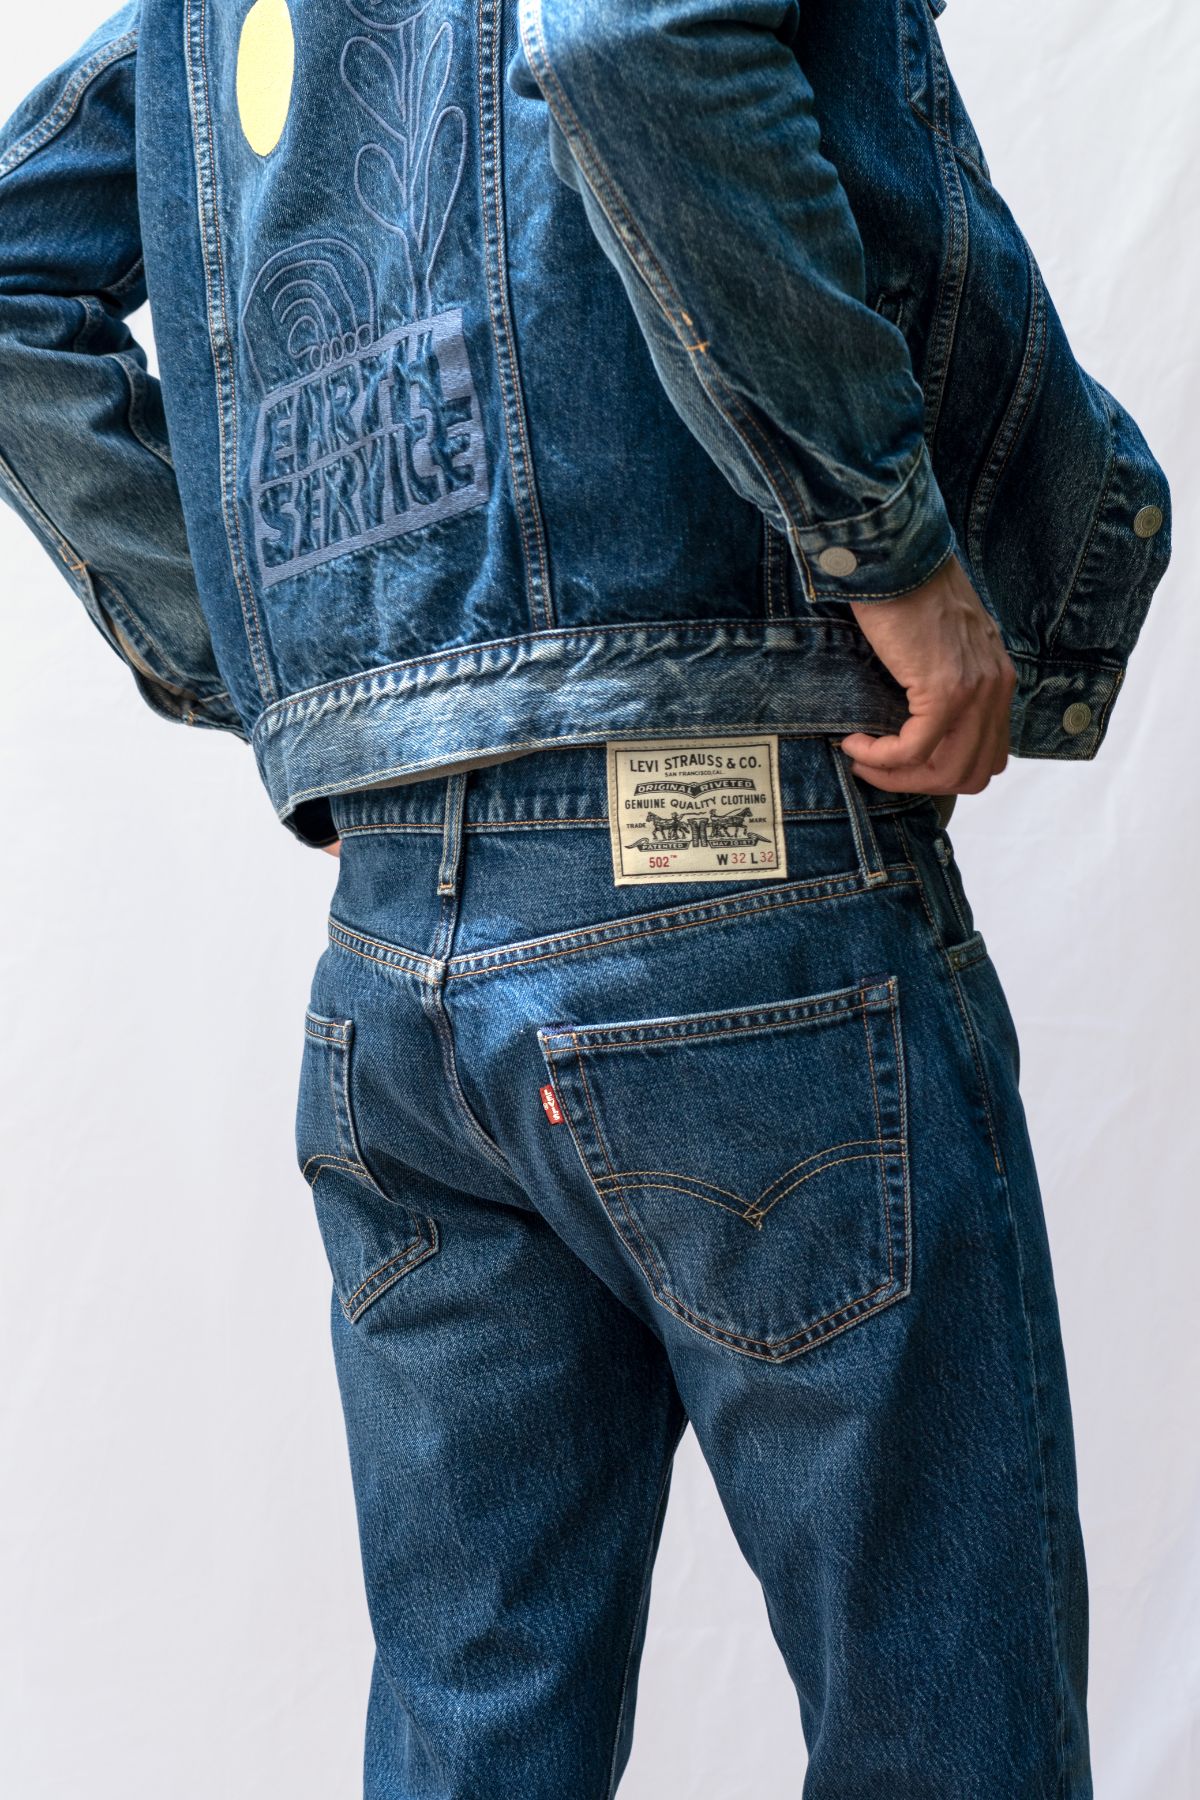 Levi’s Creates its Most Sustainable Jeans Ever